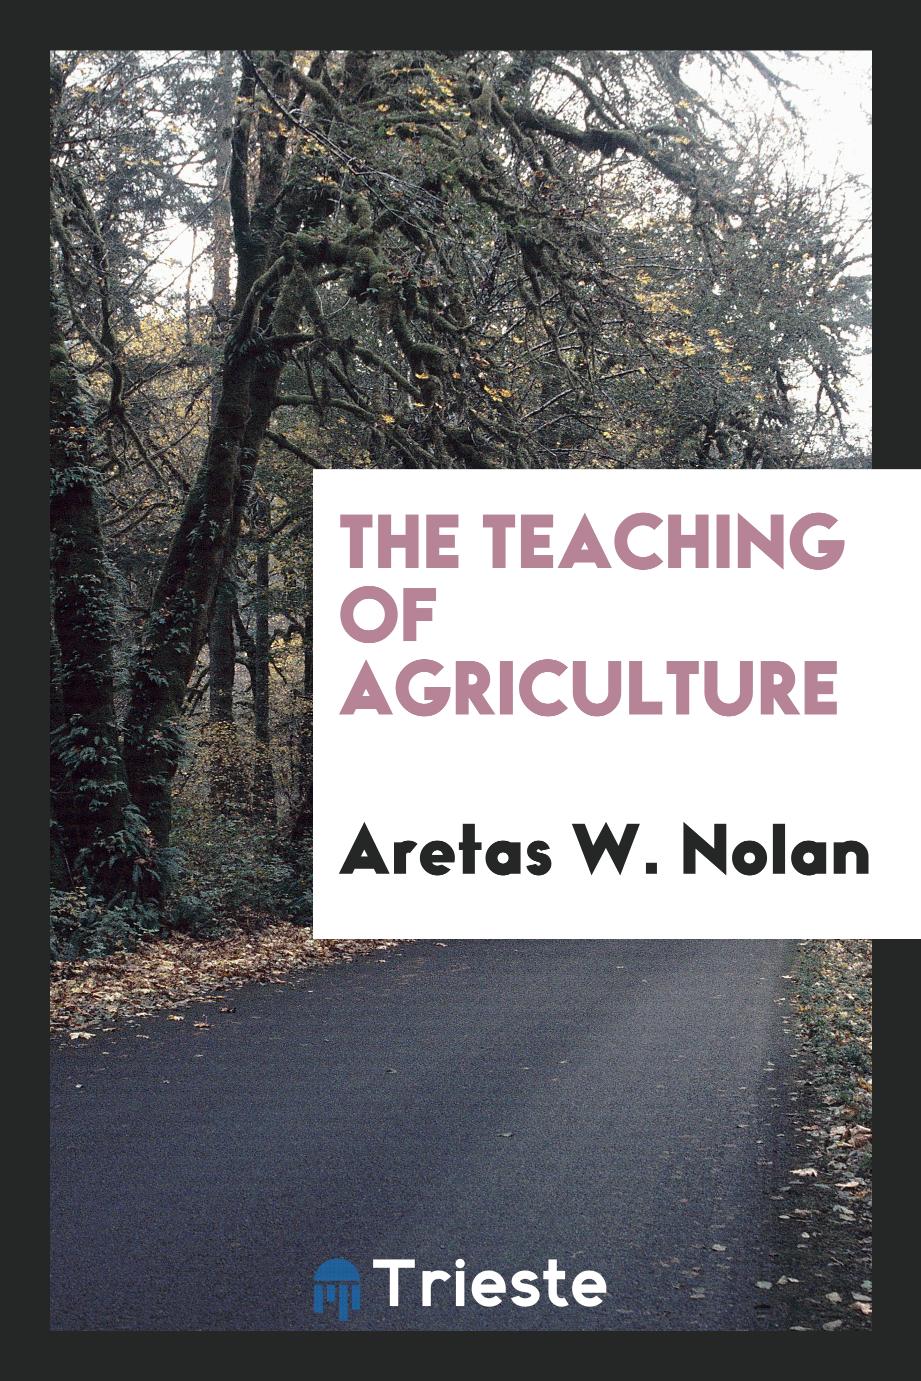 The teaching of agriculture